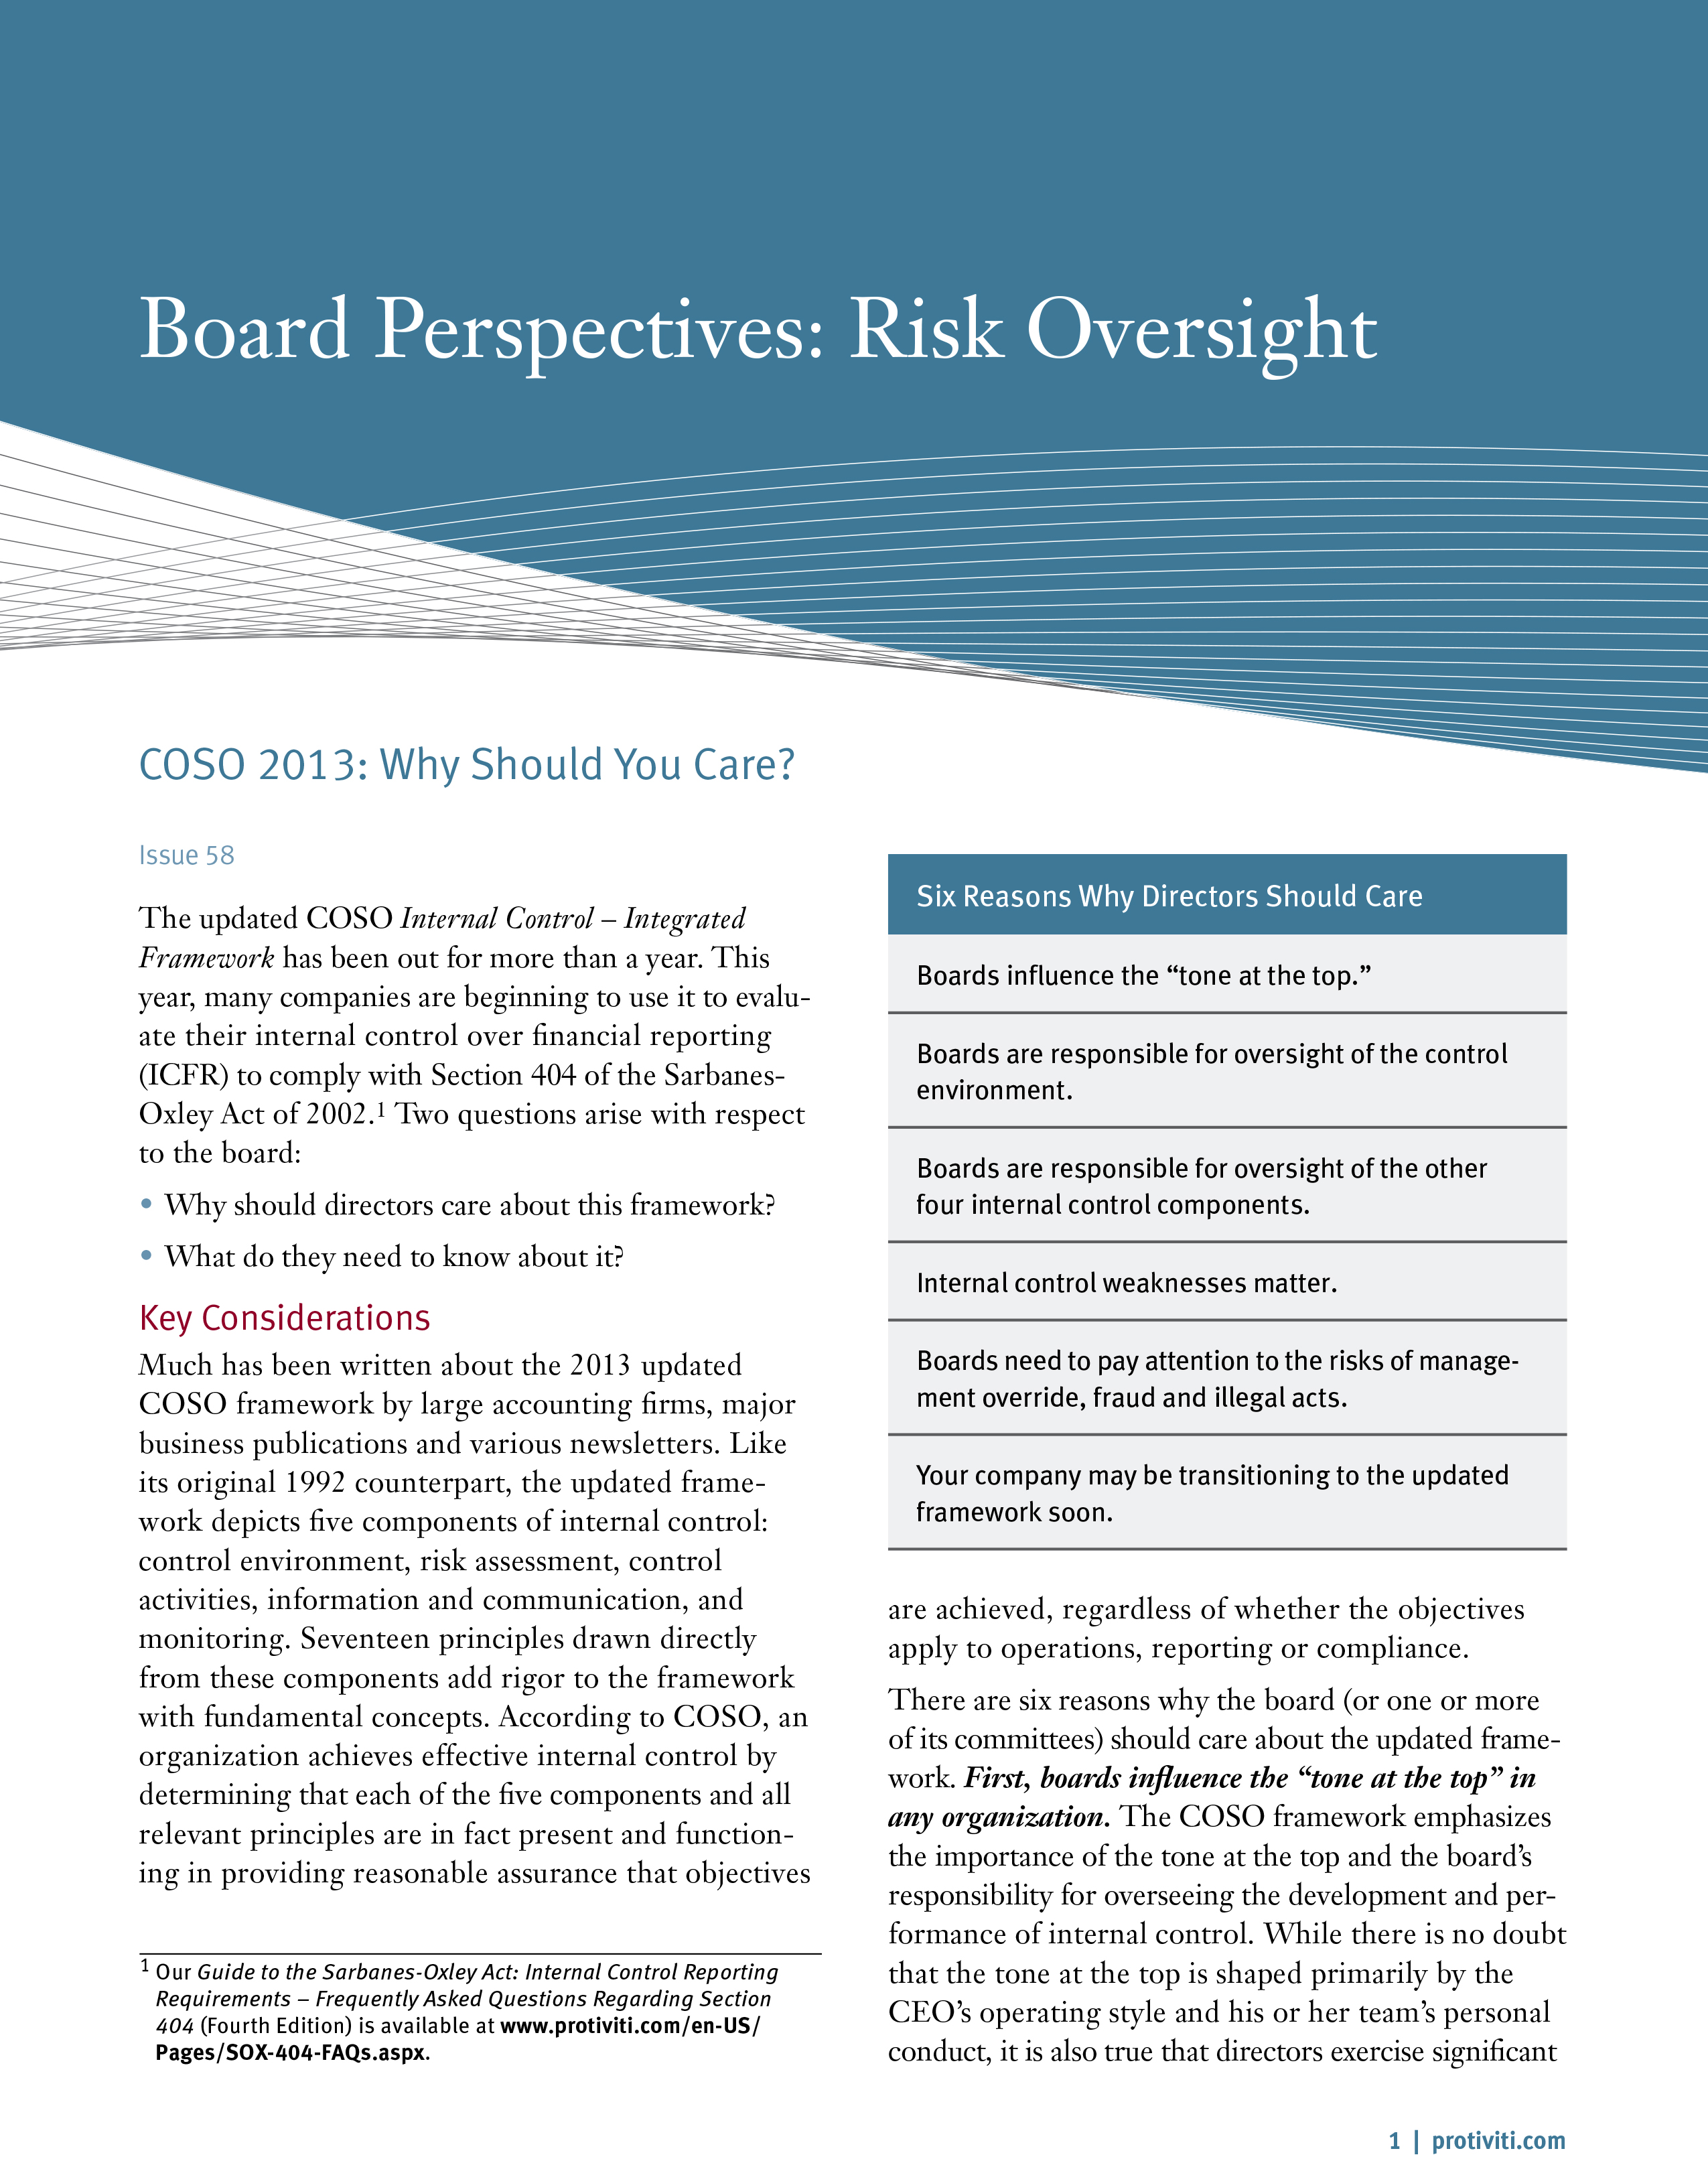 Screenshot of the first page of COSO 2013: Why Should You Care?